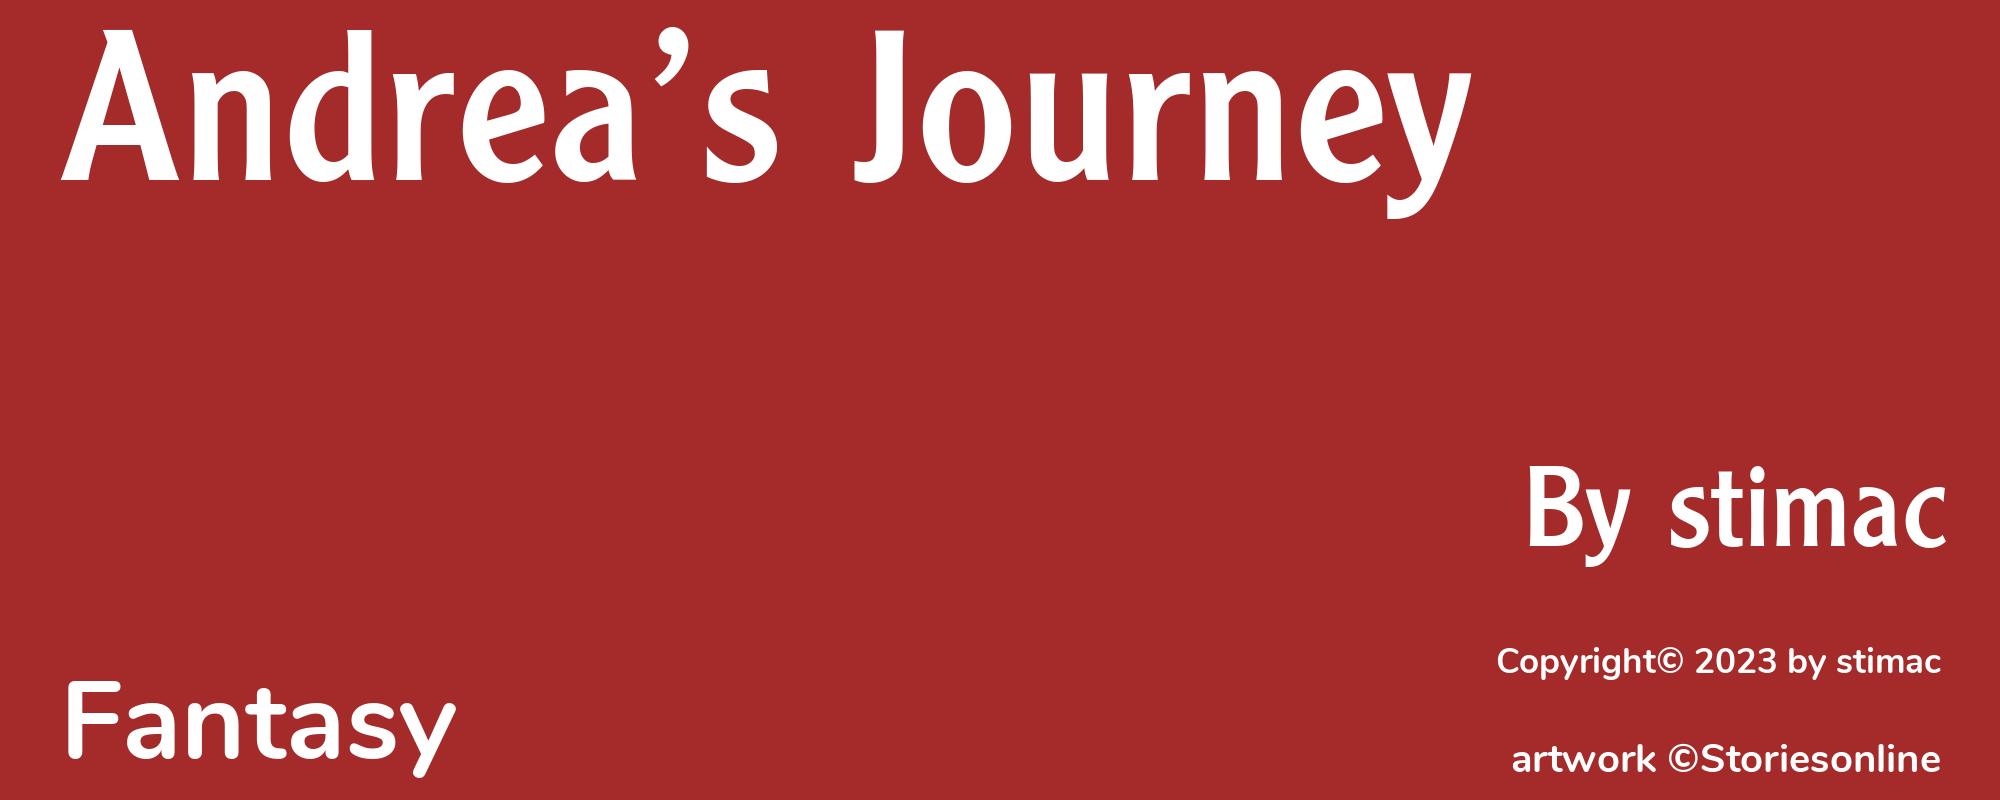 Andrea’s Journey - Cover